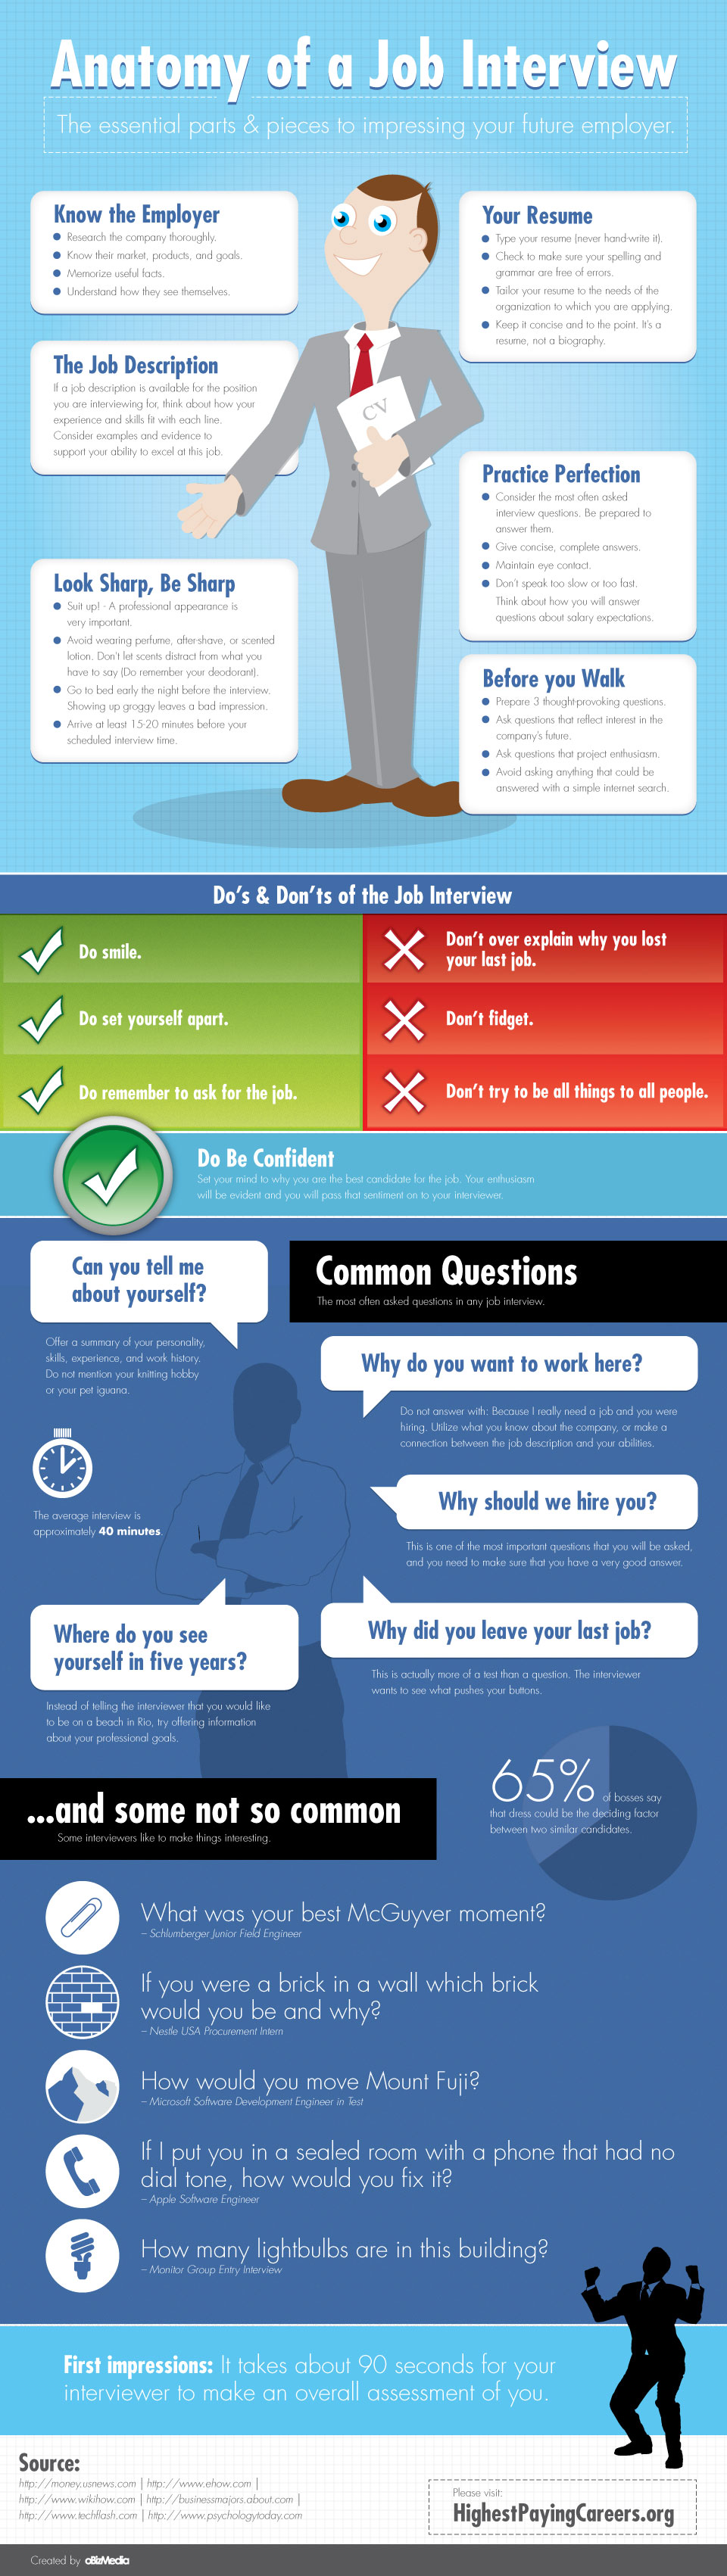 How To Ace A Job Interview [Infographic]